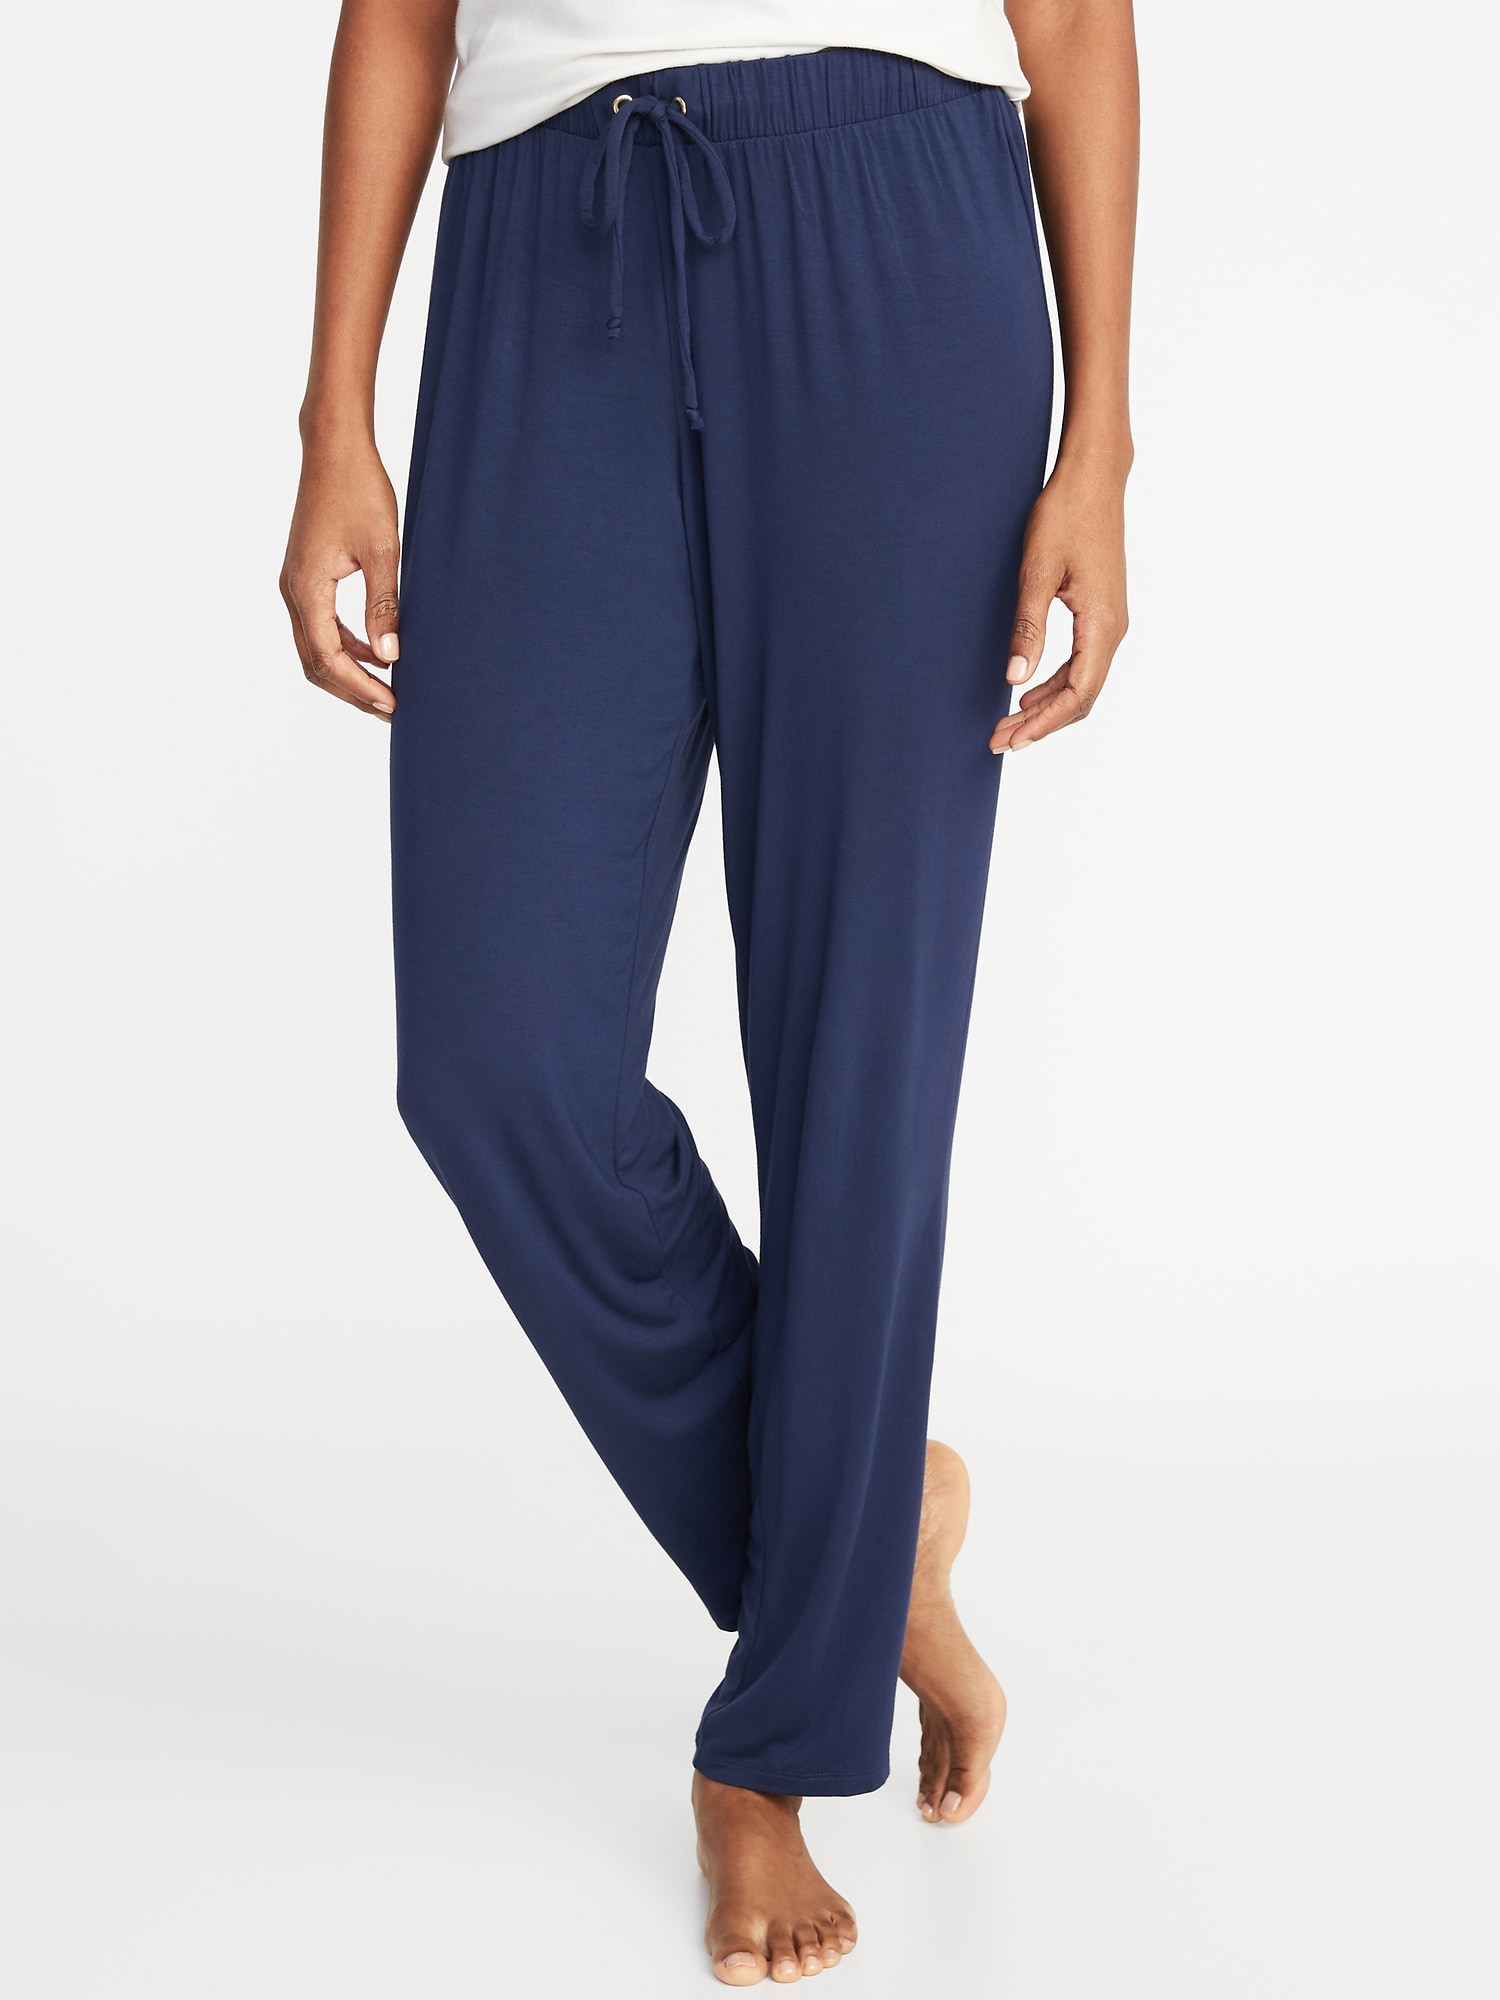 Soft Jersey Lounge Pants for Women